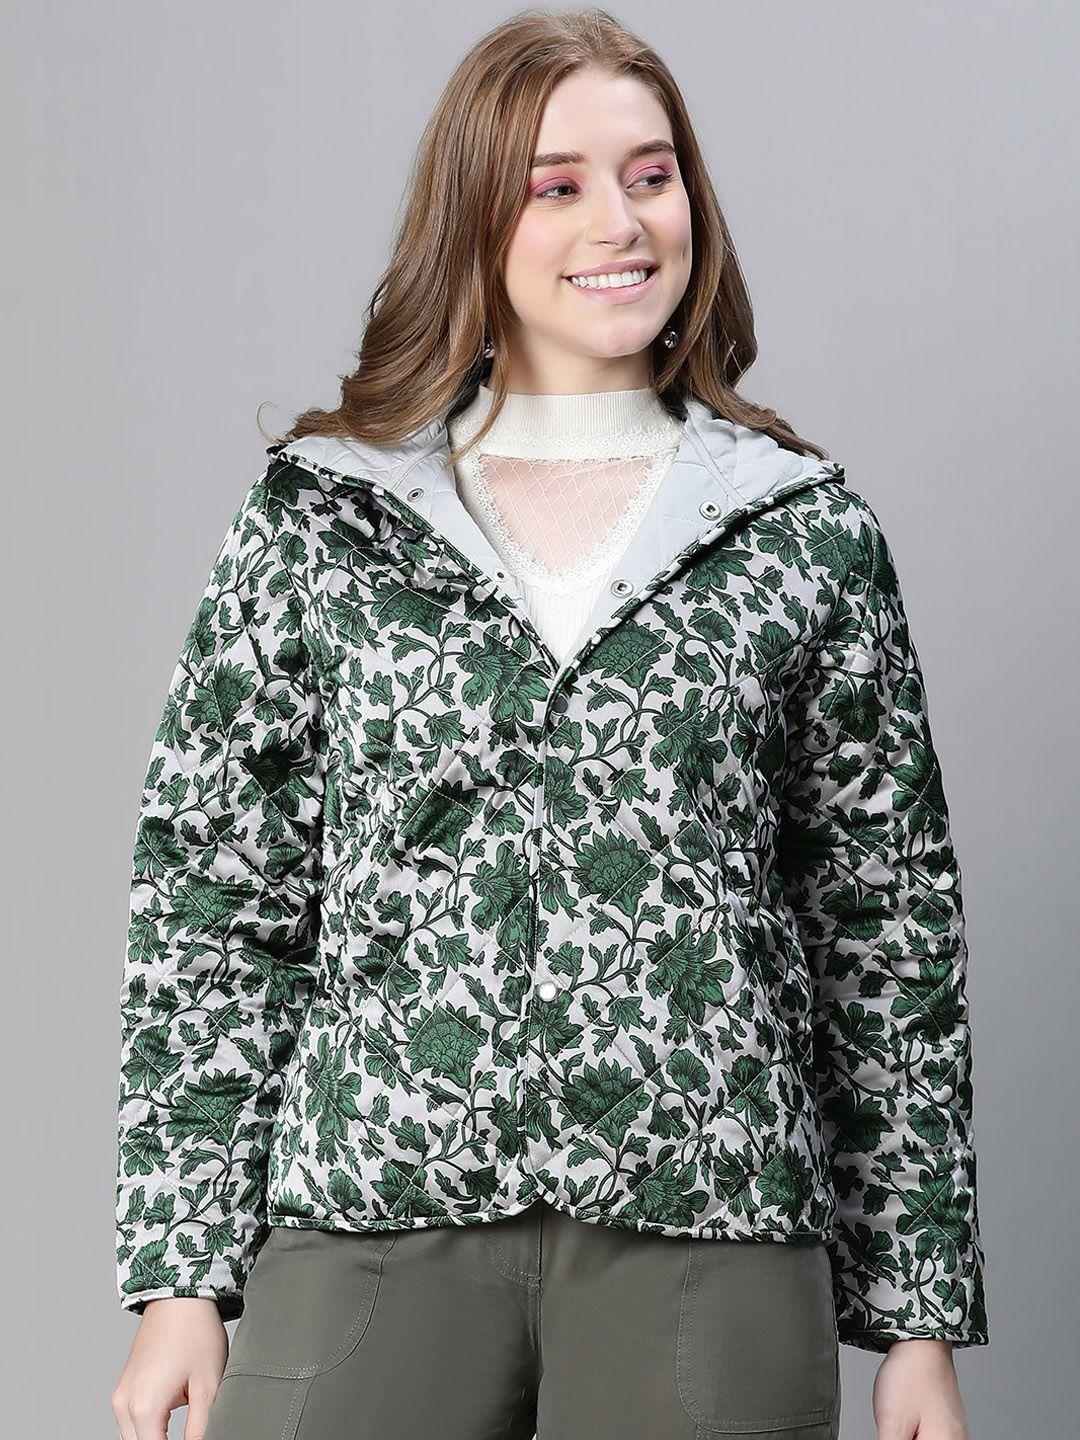 oxolloxo floral printed hooded quilted jacket